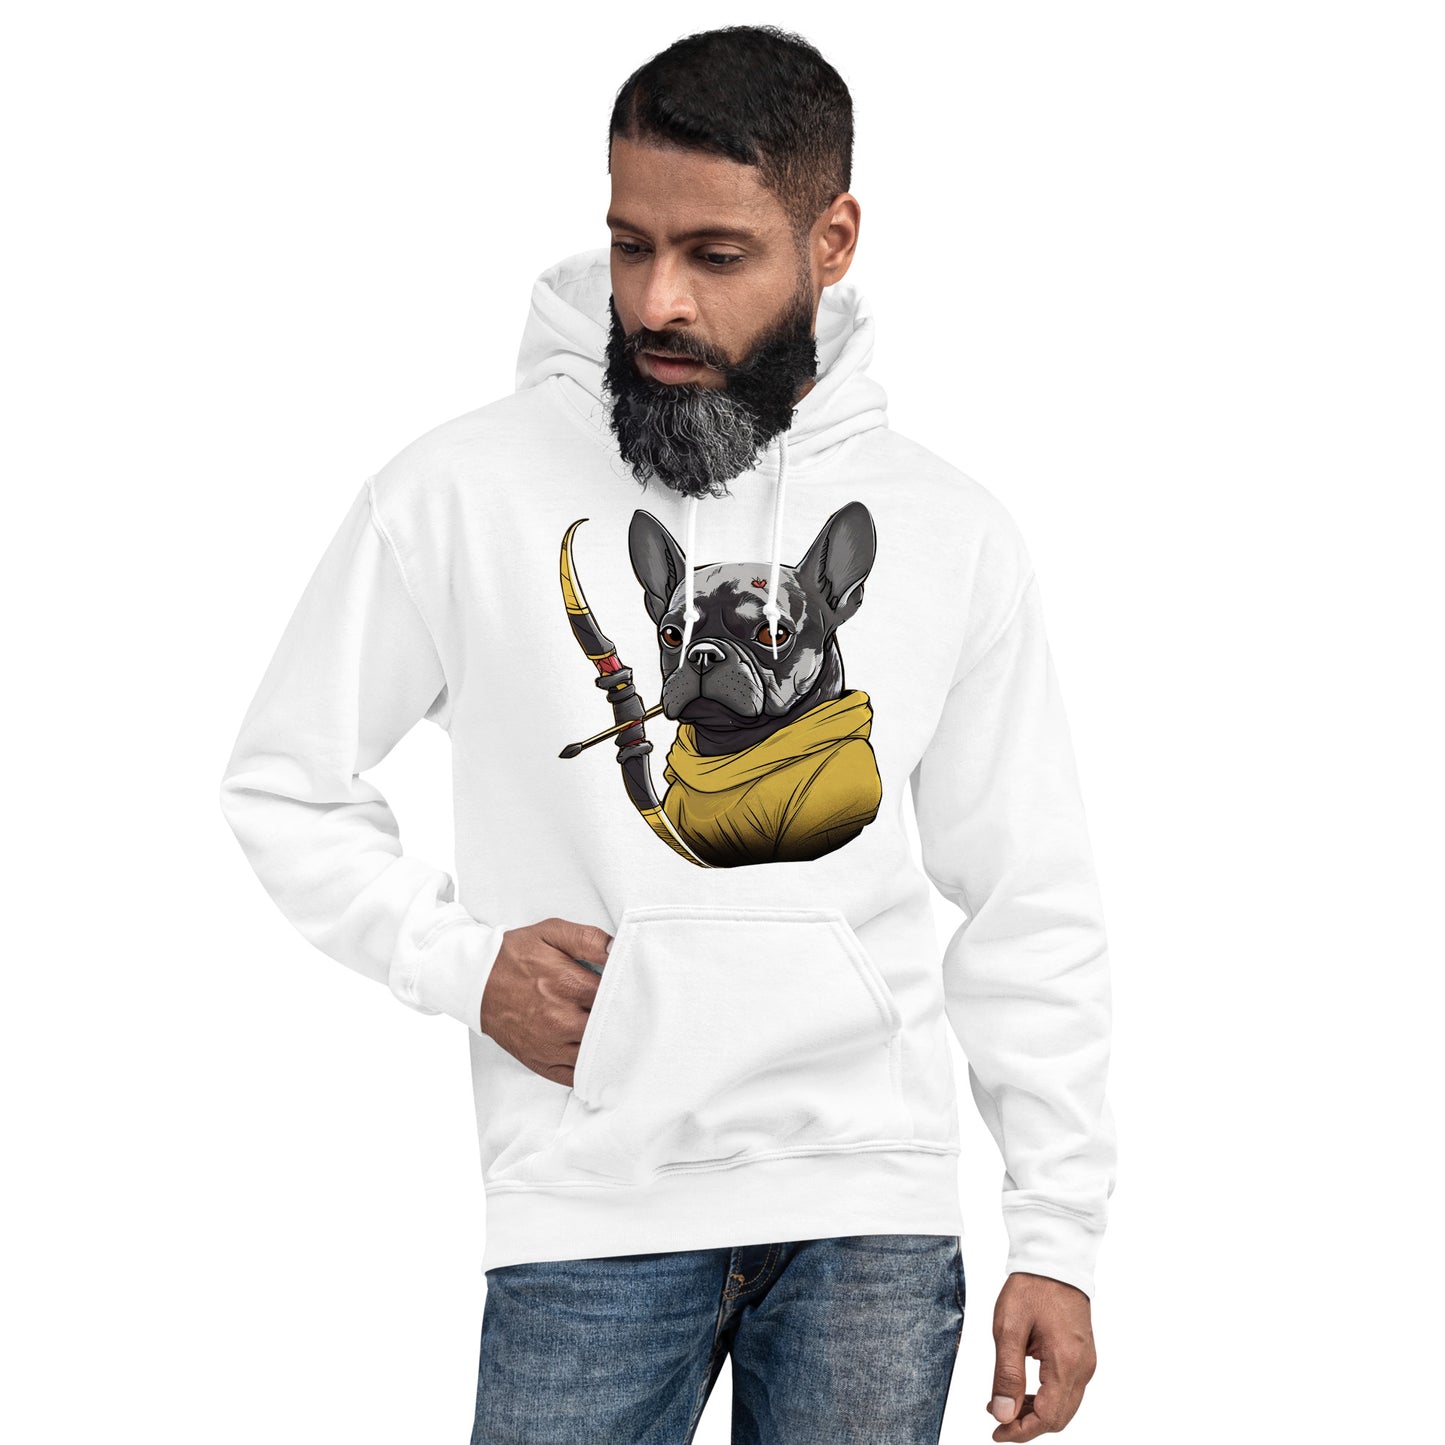 Frenchie Love Unisex Hoodie - Soft & Chic Apparel for Dog Enthusiasts